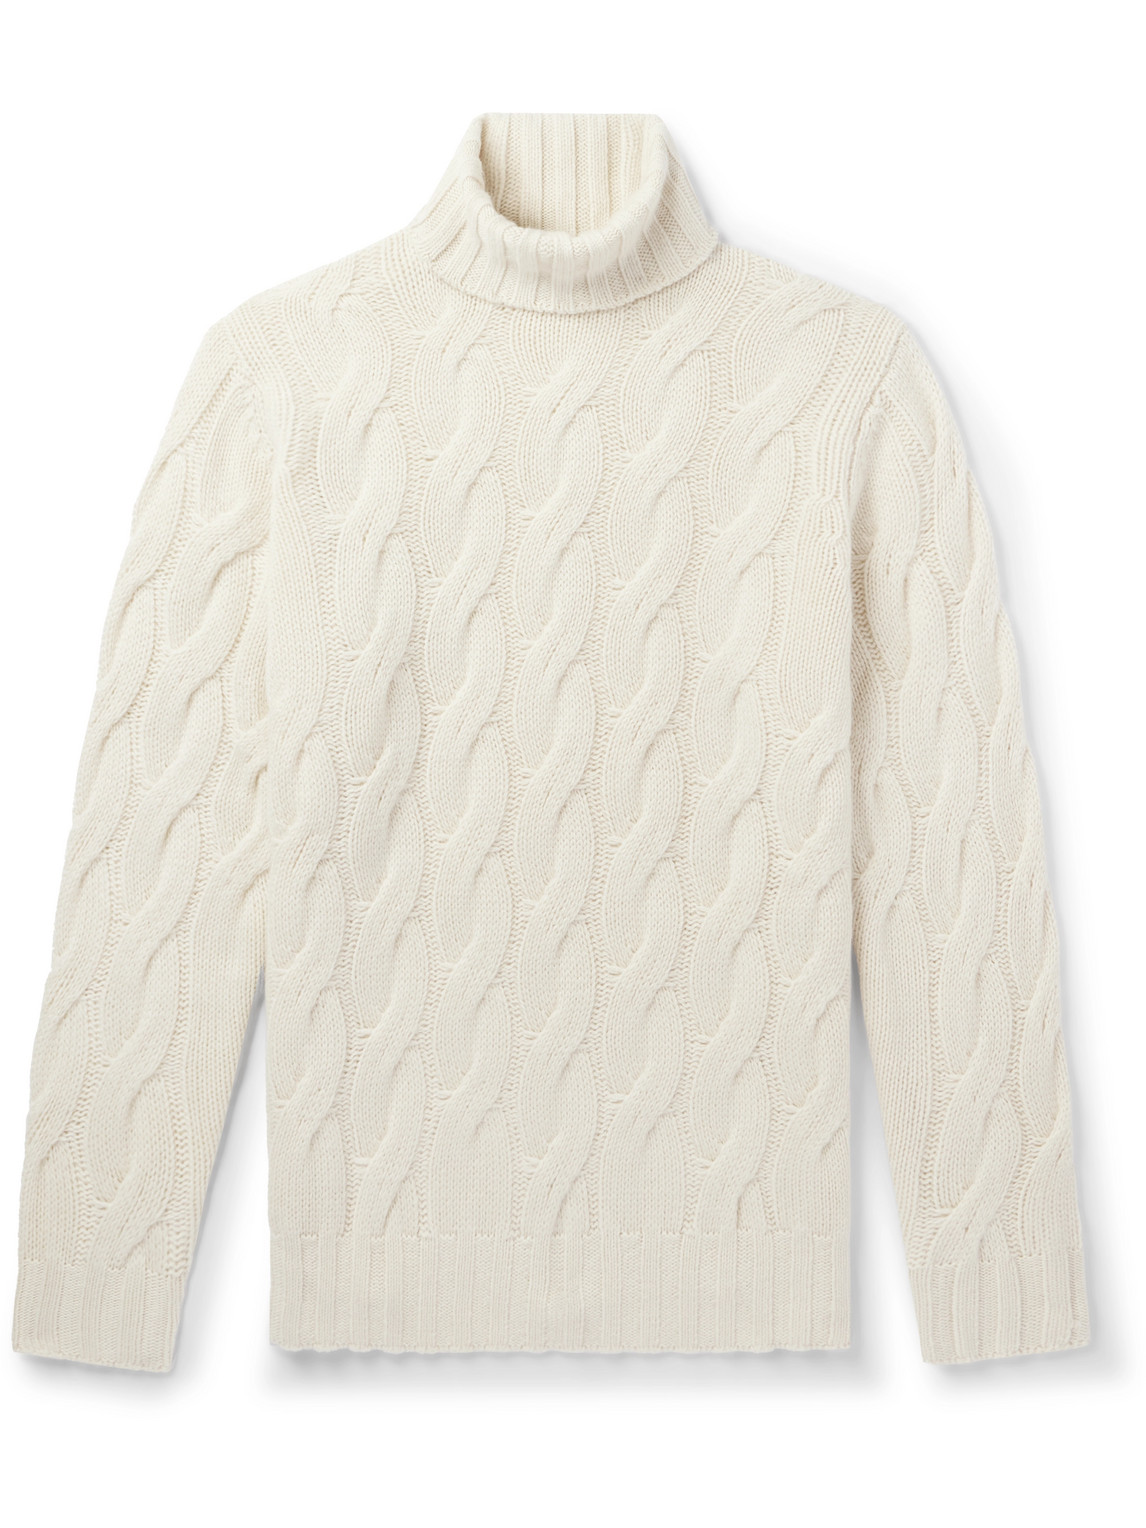 THOM SWEENEY CABLE-KNIT CASHMERE ROLLNECK SWEATER